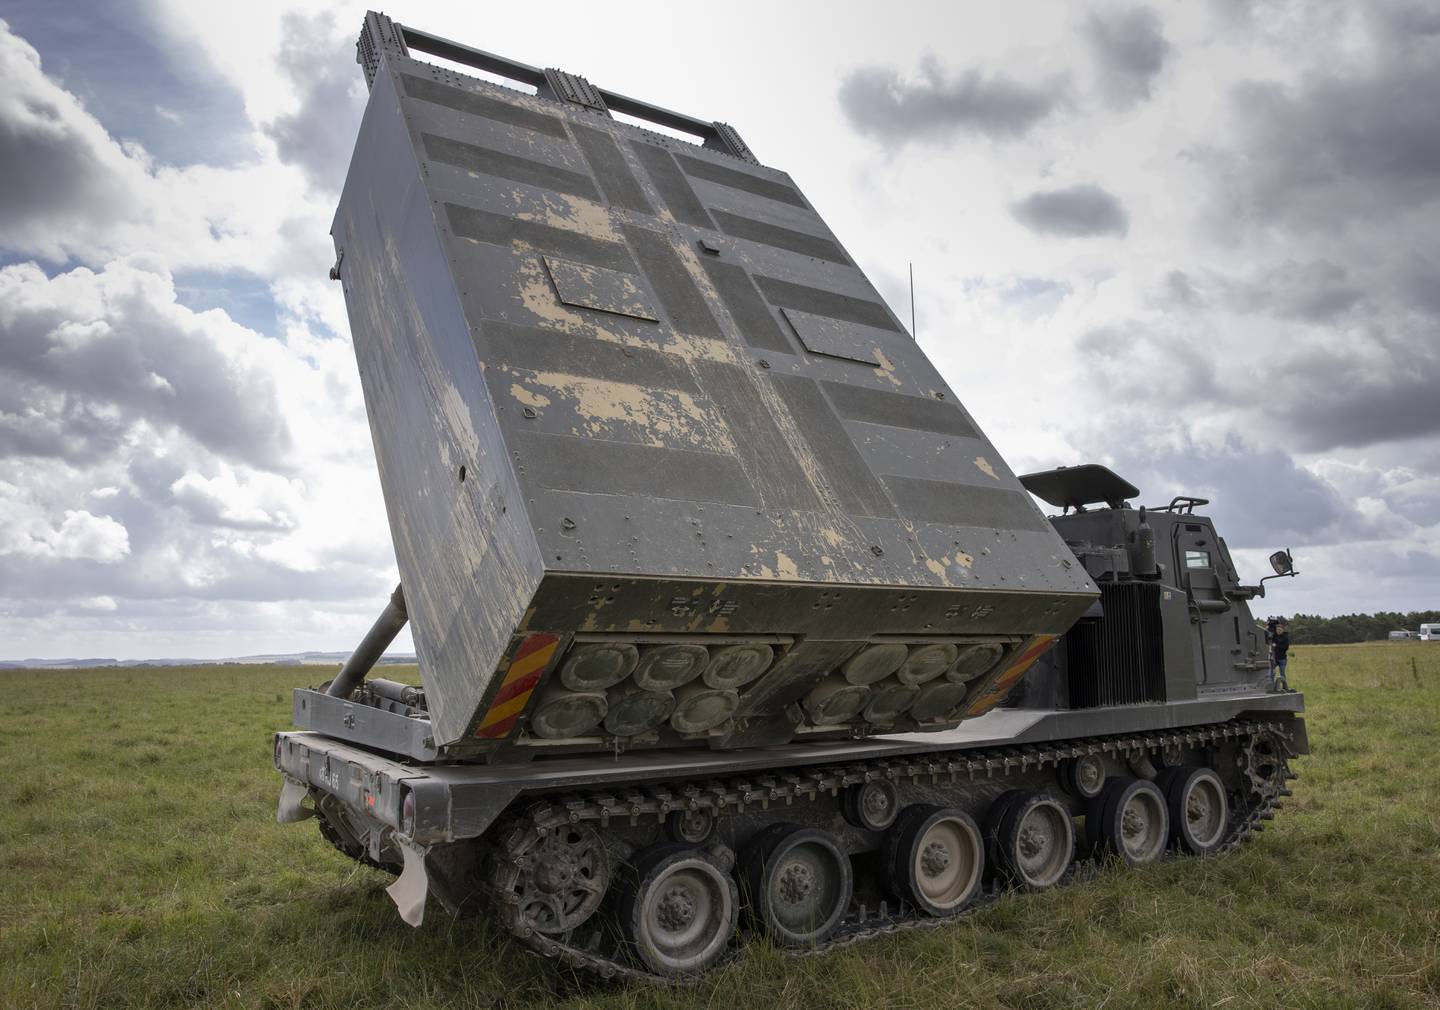 British Army personnel teach members of the Ukrainian armed forces how to operate a multiple-launch rocket systems (MLRS) - to defend itself against Russia - on Salisbury Plain, Wiltshire. More MLRS and other advanced systems are needed to protect Britain itself, experts have told The National. PA